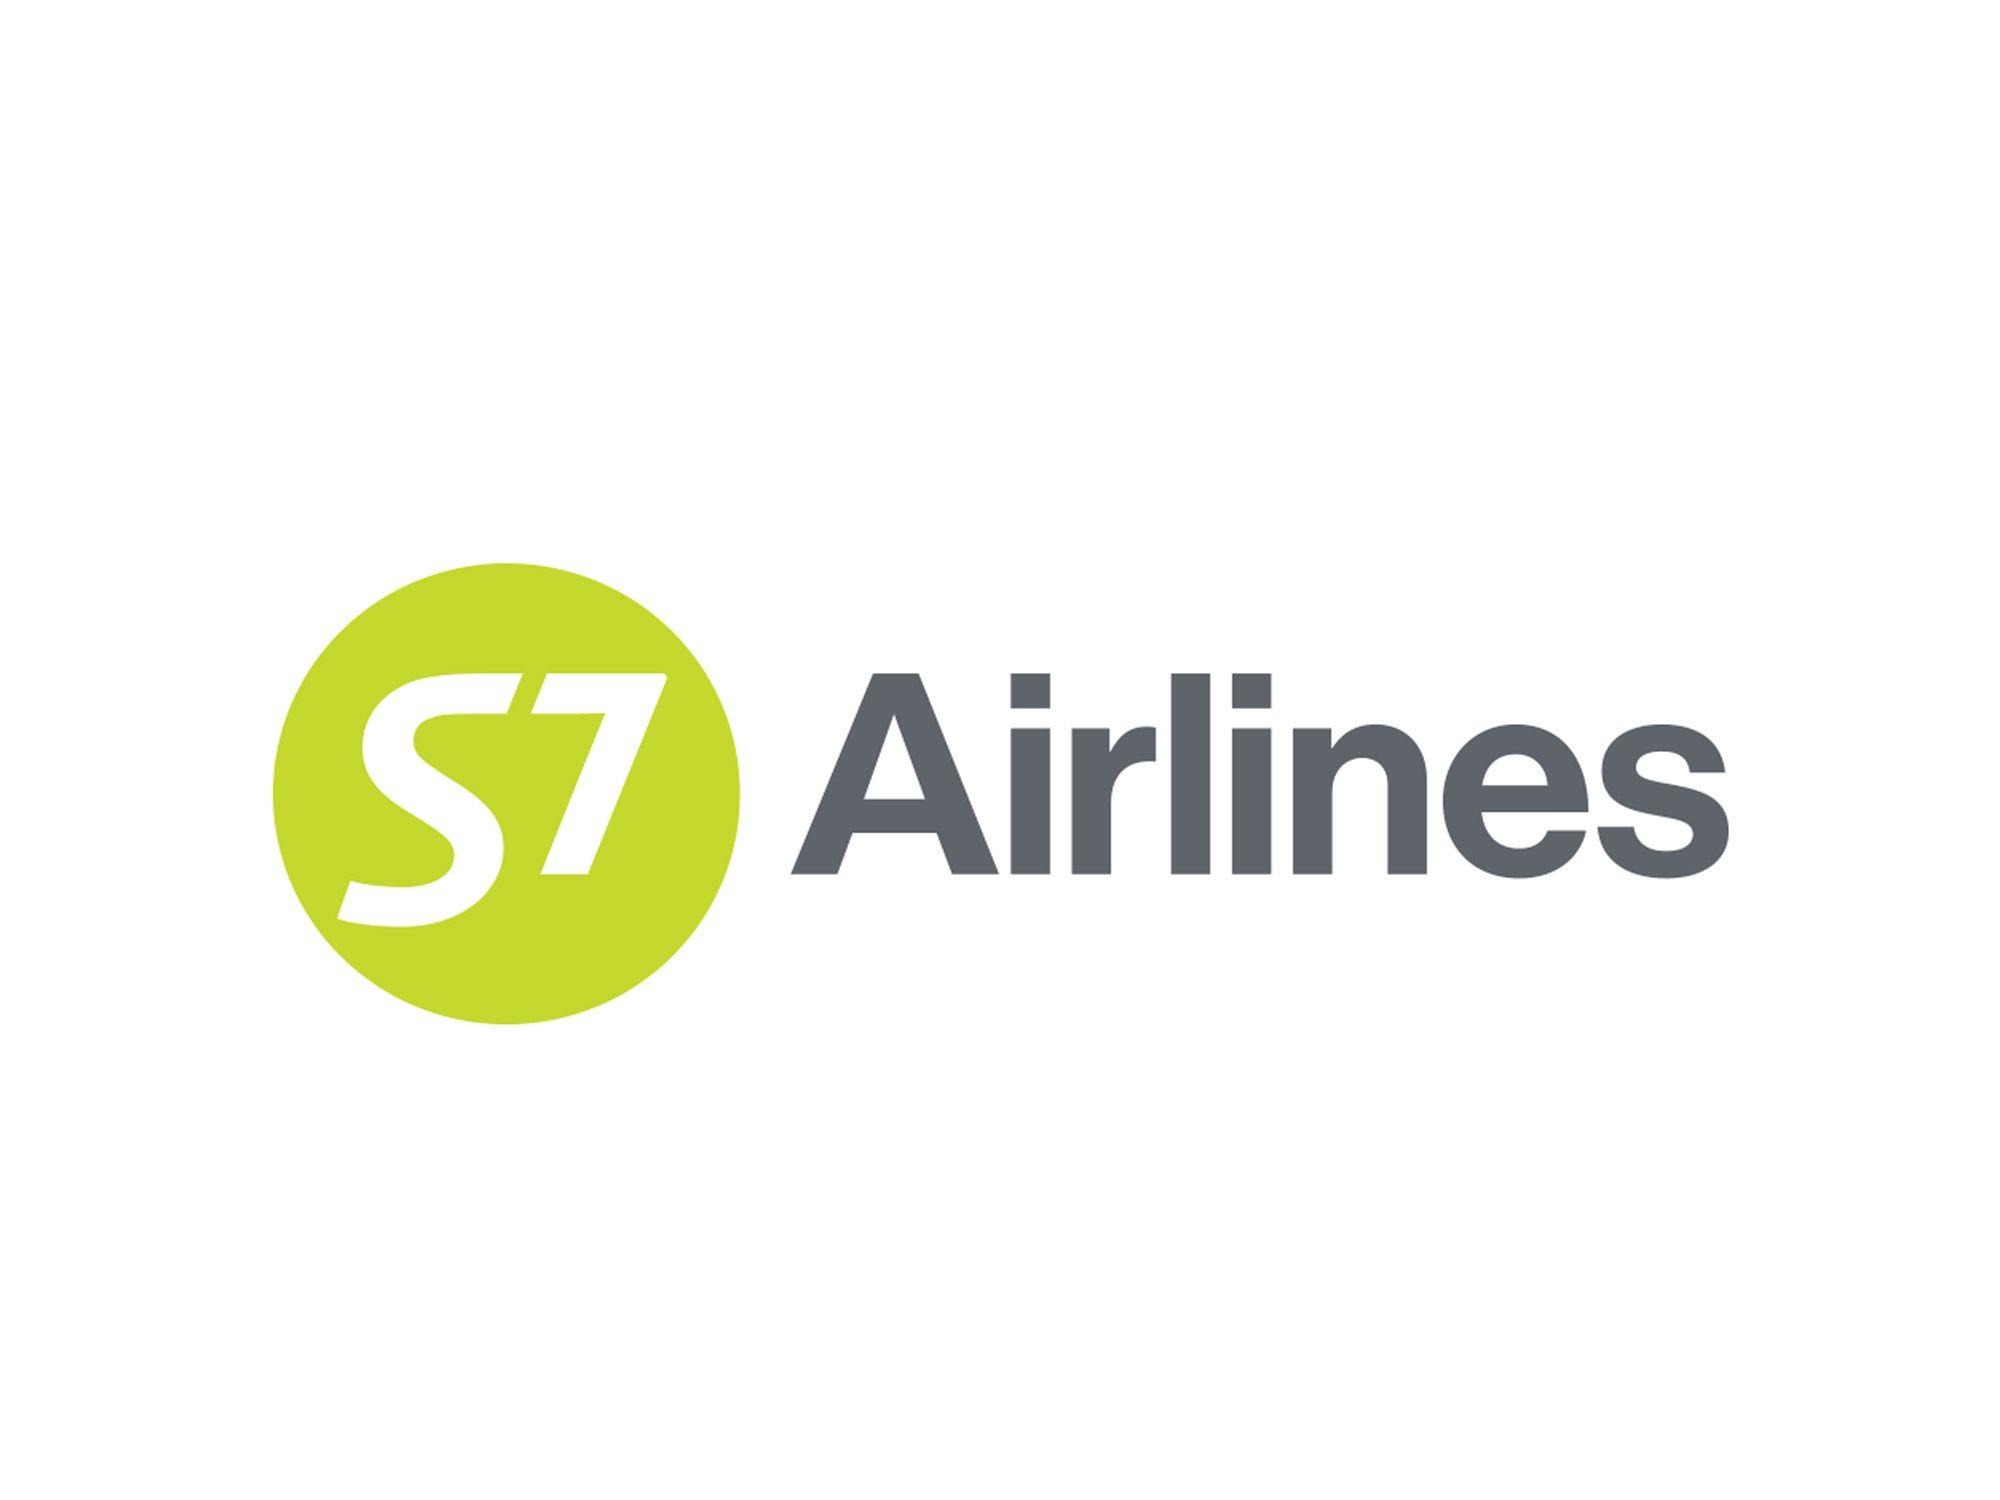 S7 Logo - S7 Airlines